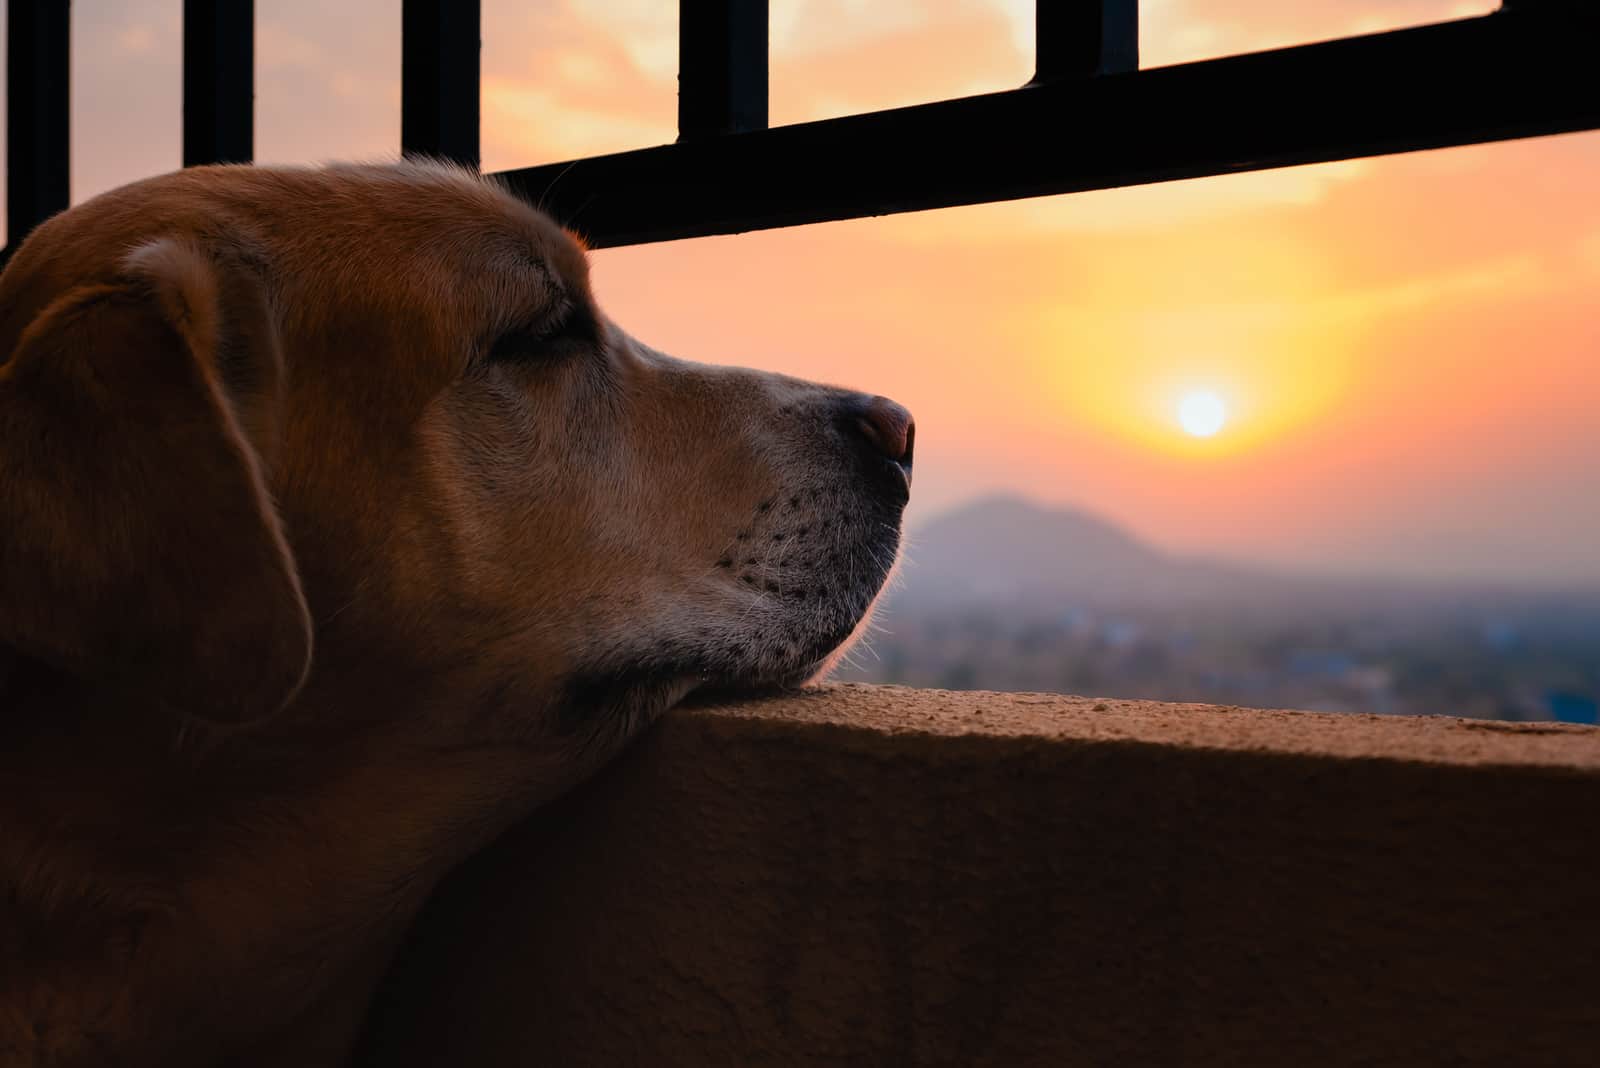 the dog watches the sunset through the fence